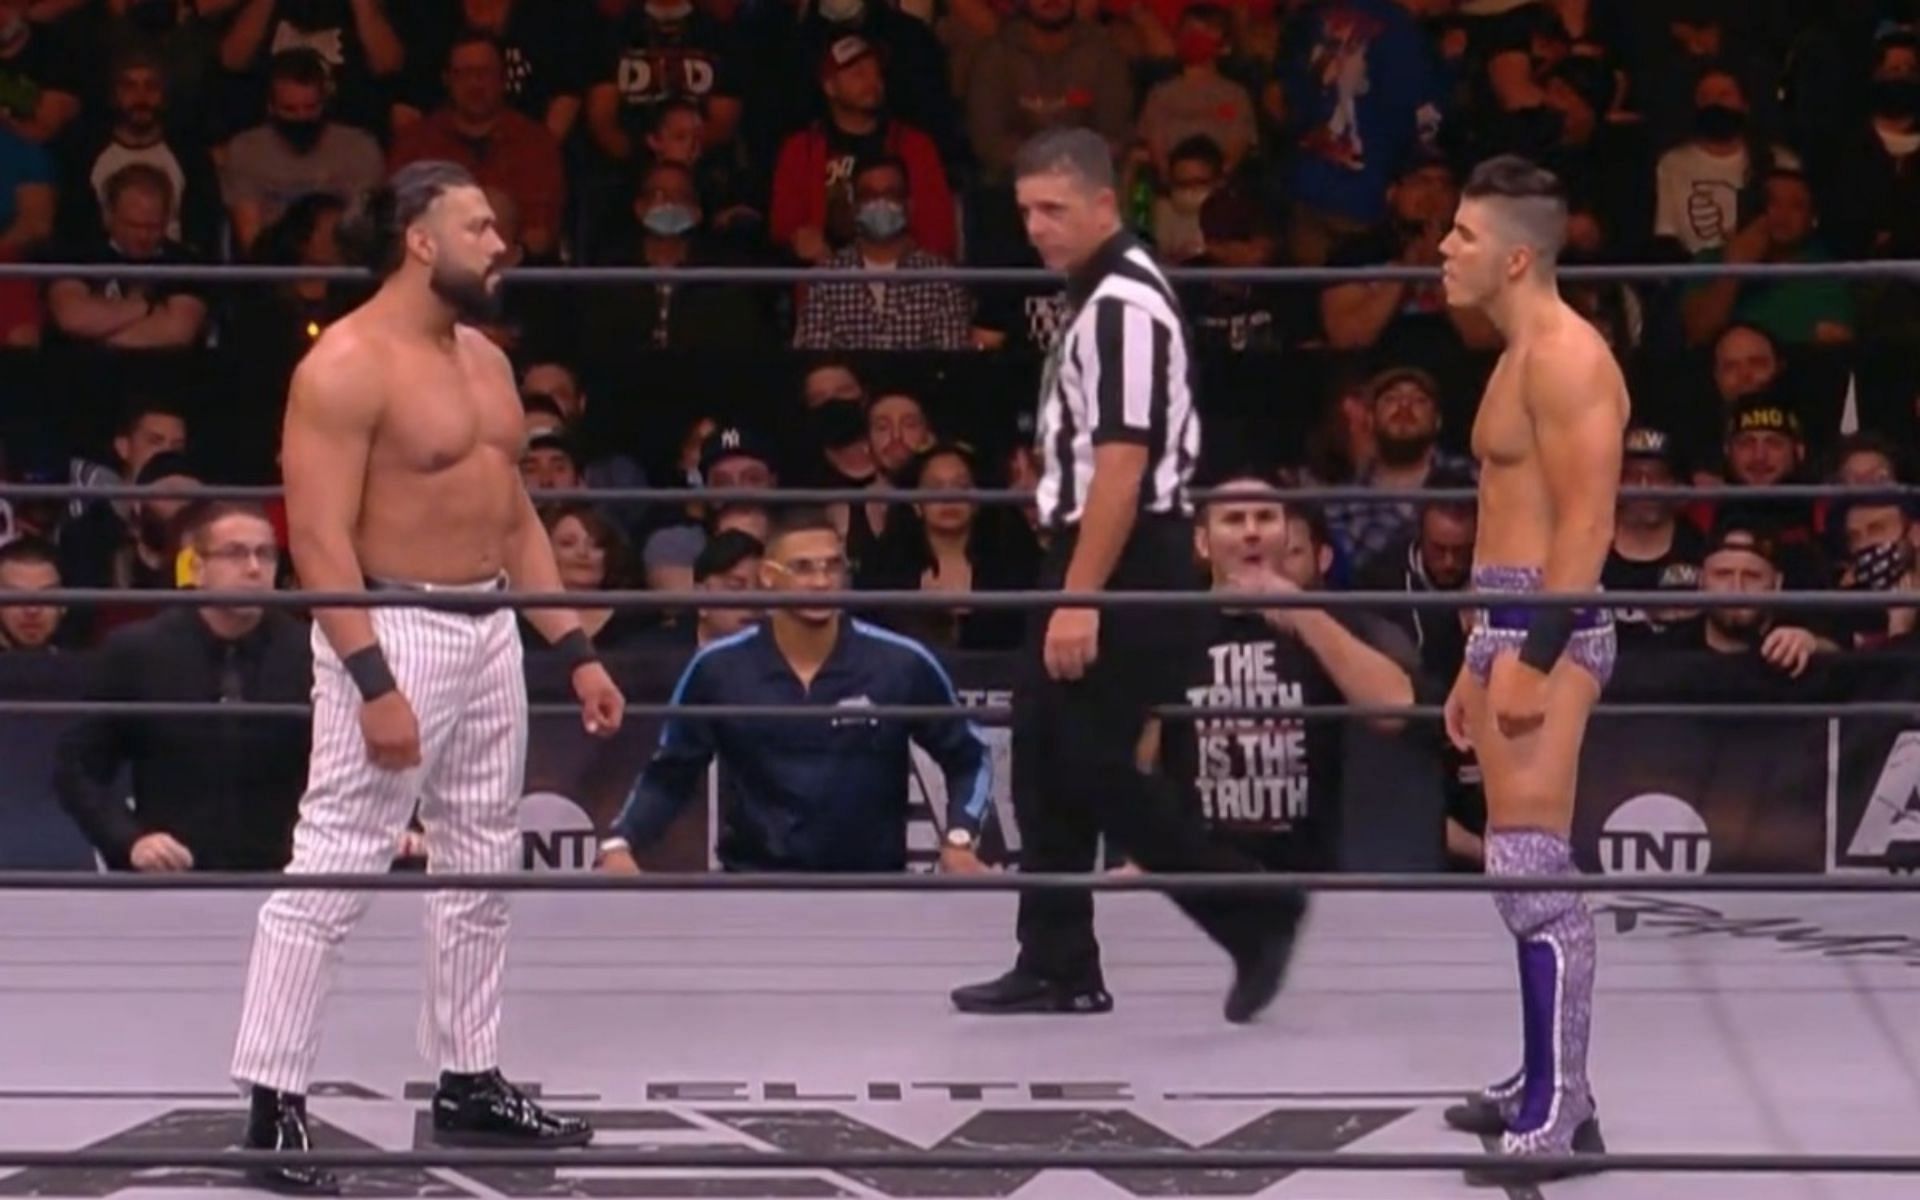 Andrade El Idolo and Sammy Guevara clashed on multiple occasions in AEW